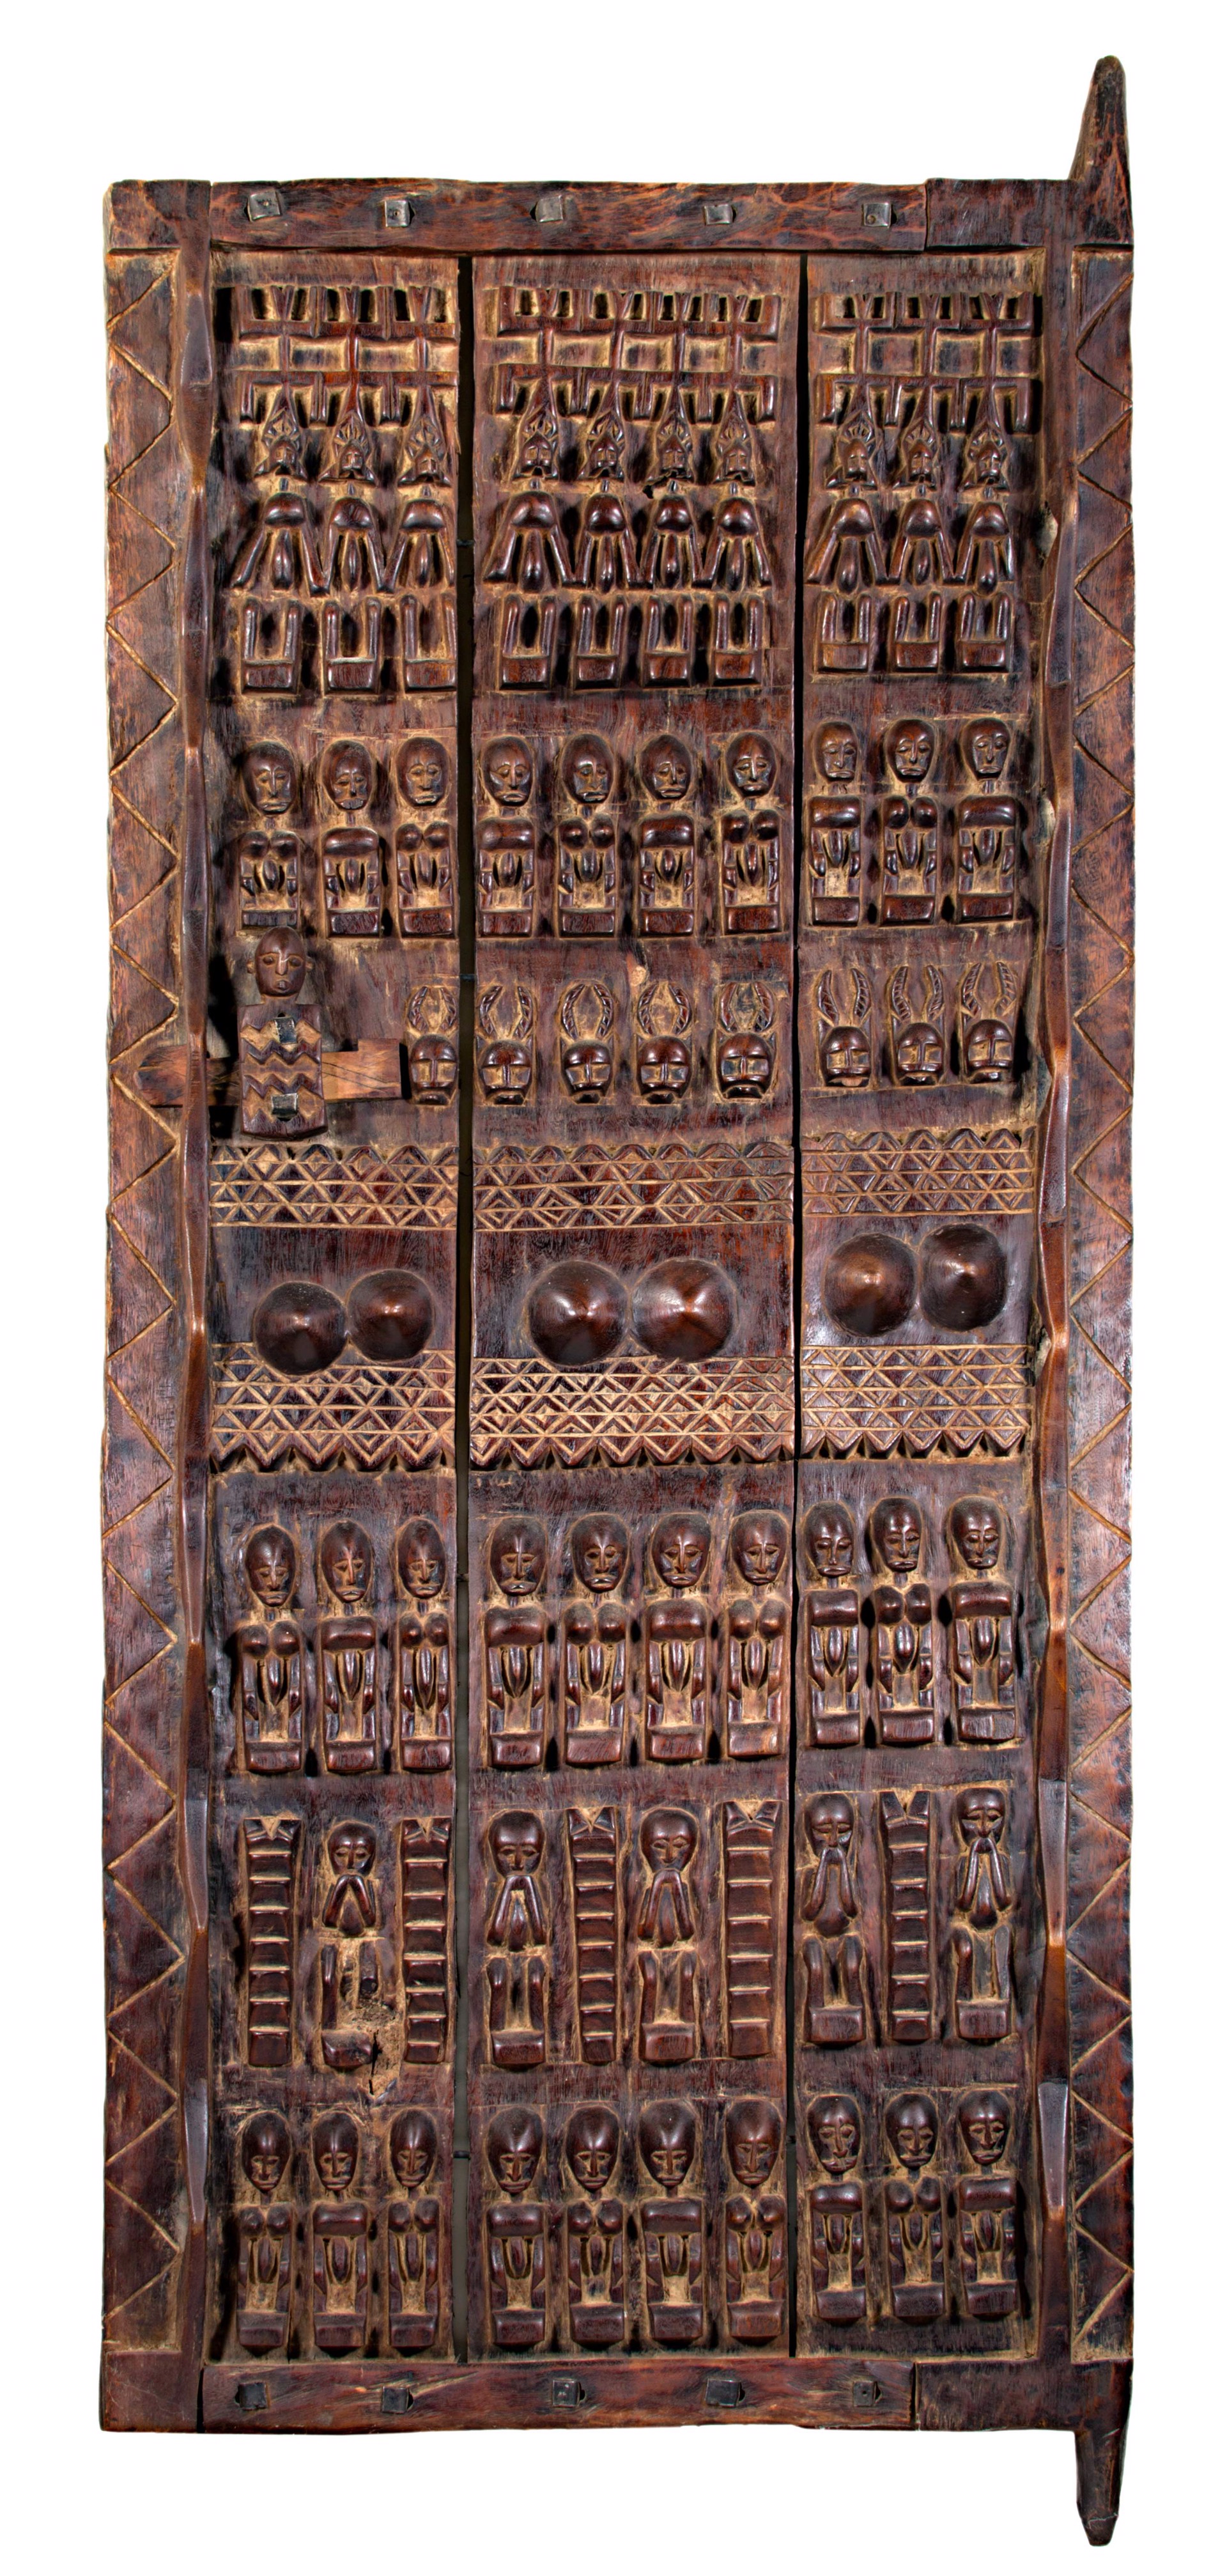 House Door - Dogon, Mali by African